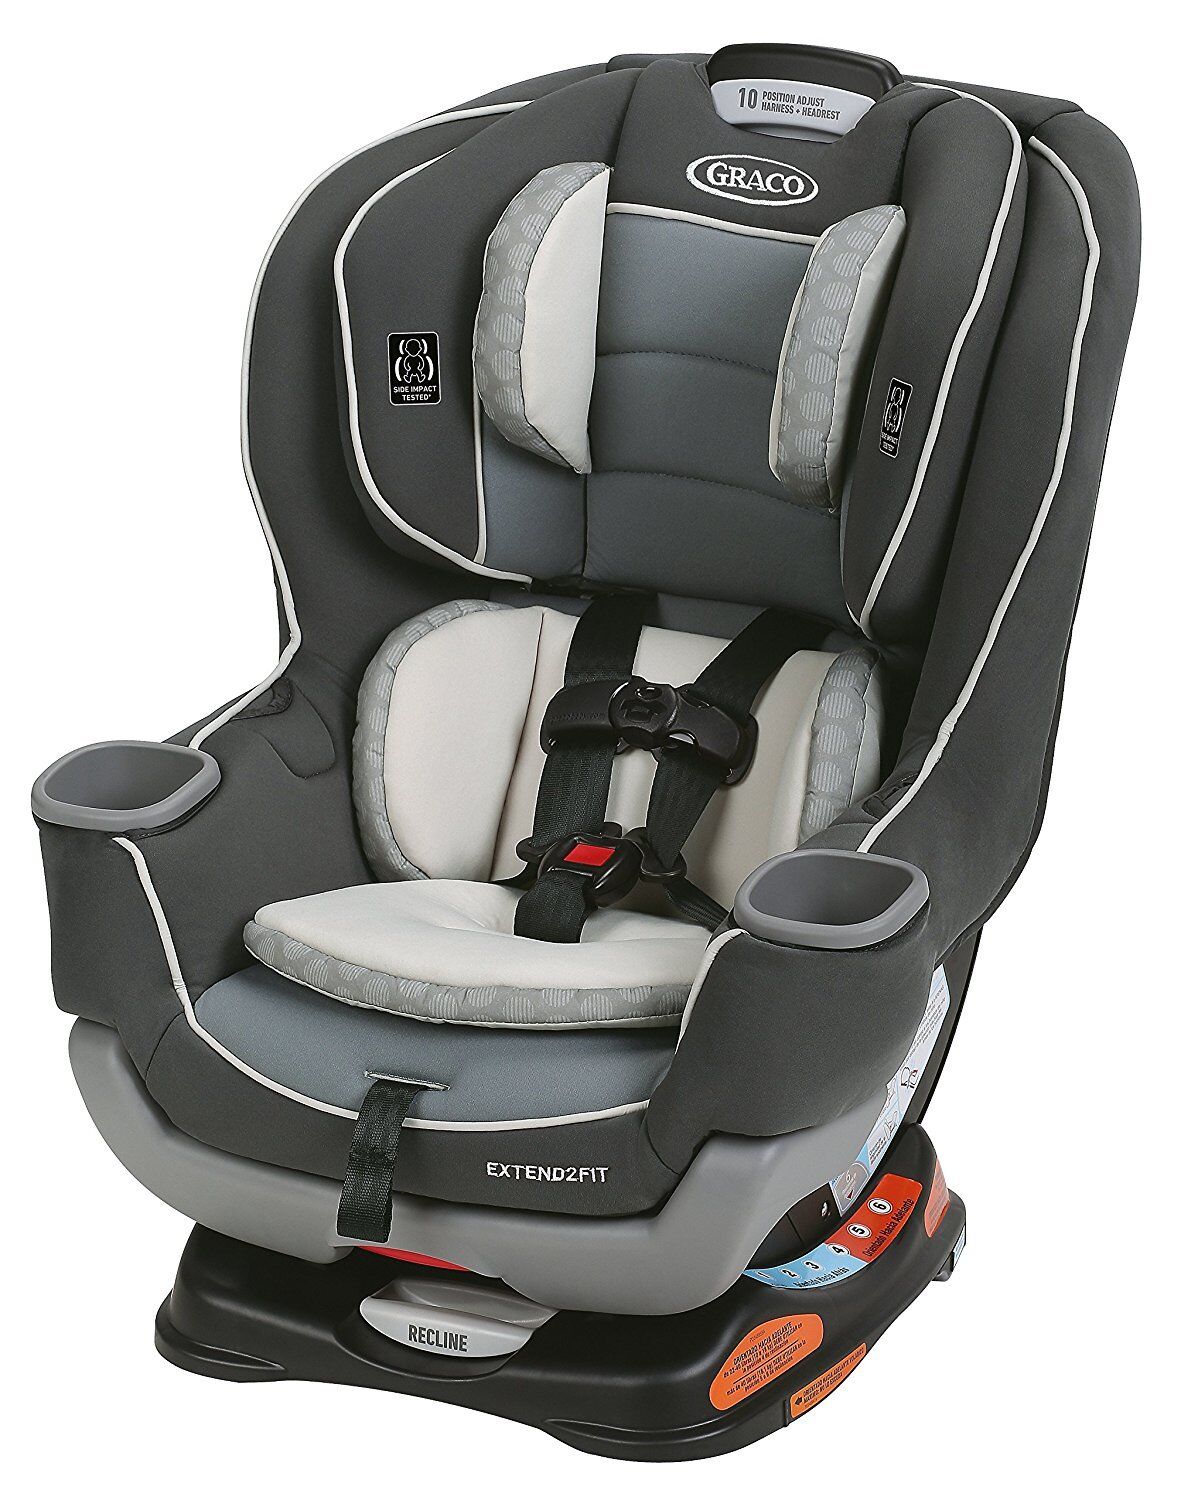 Graco Baby Extend2Fit Convertible Car Seat Infant Child Safety Davis NEW Graco 1993220